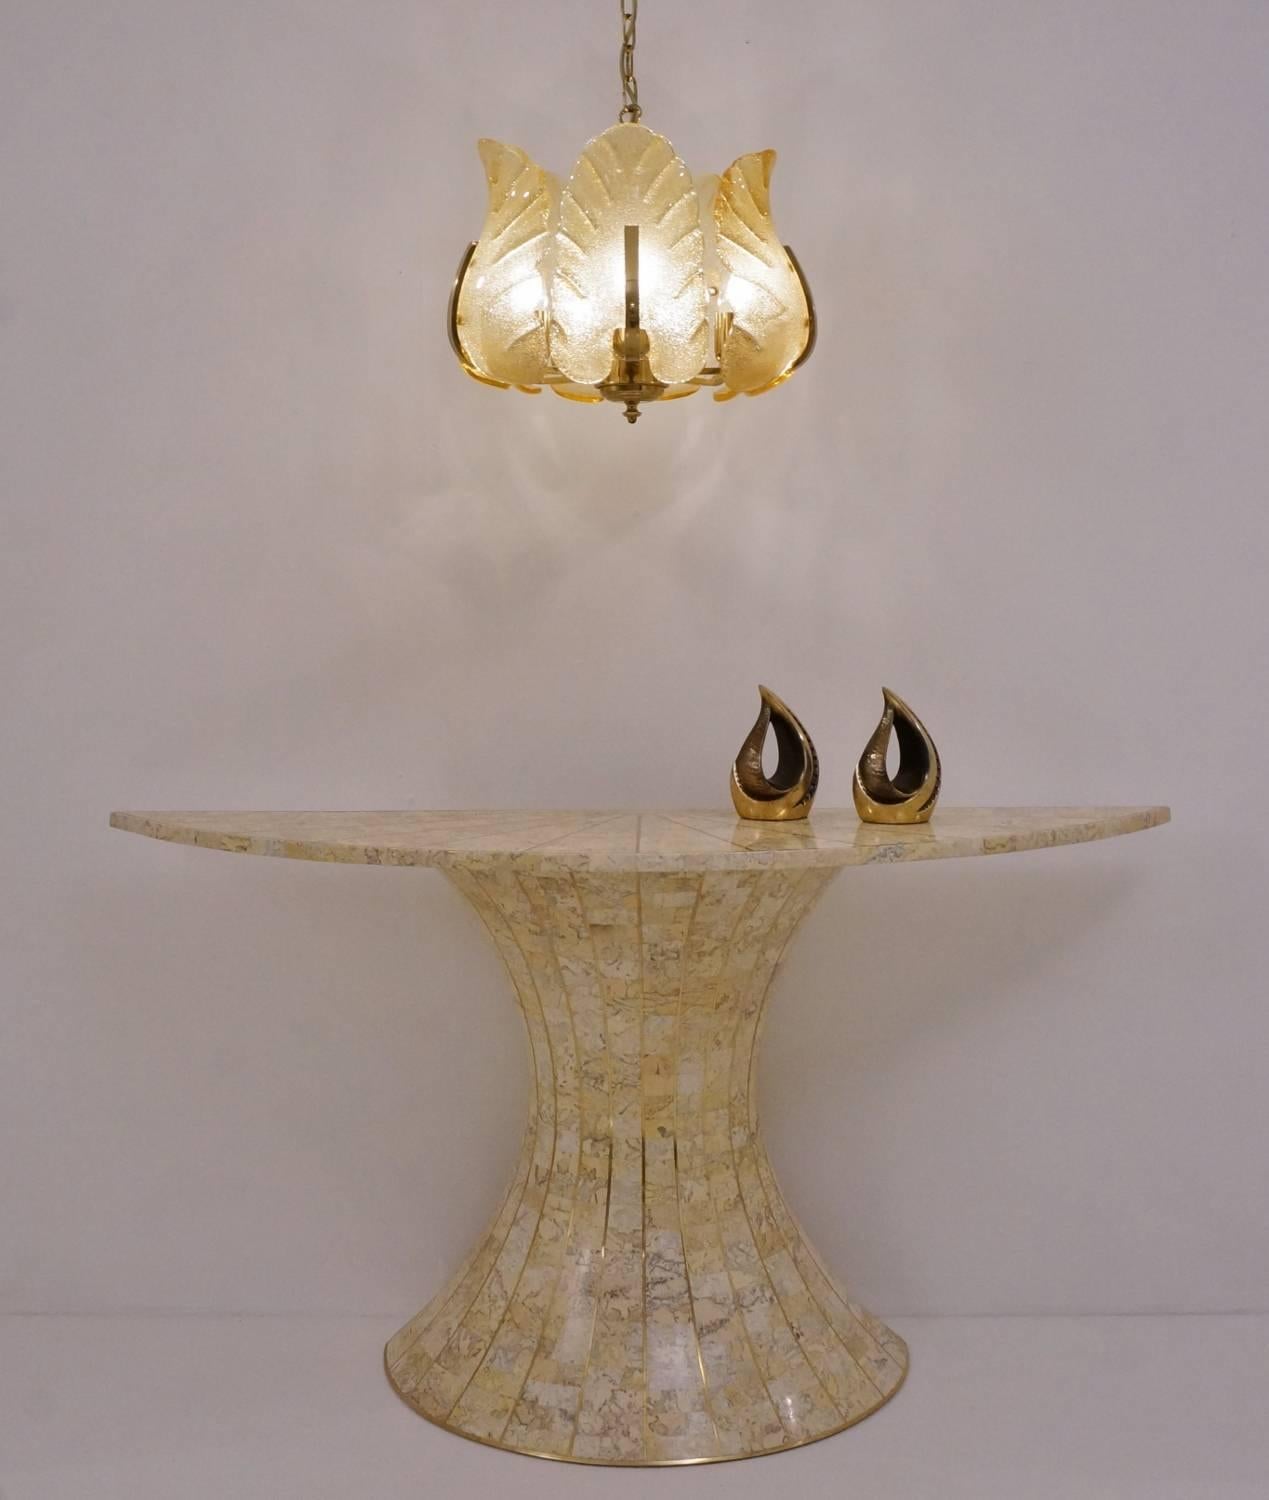 Swedish Carl Fagerlund Orrefors Chandeliers, a Matching Pair, circa 1960